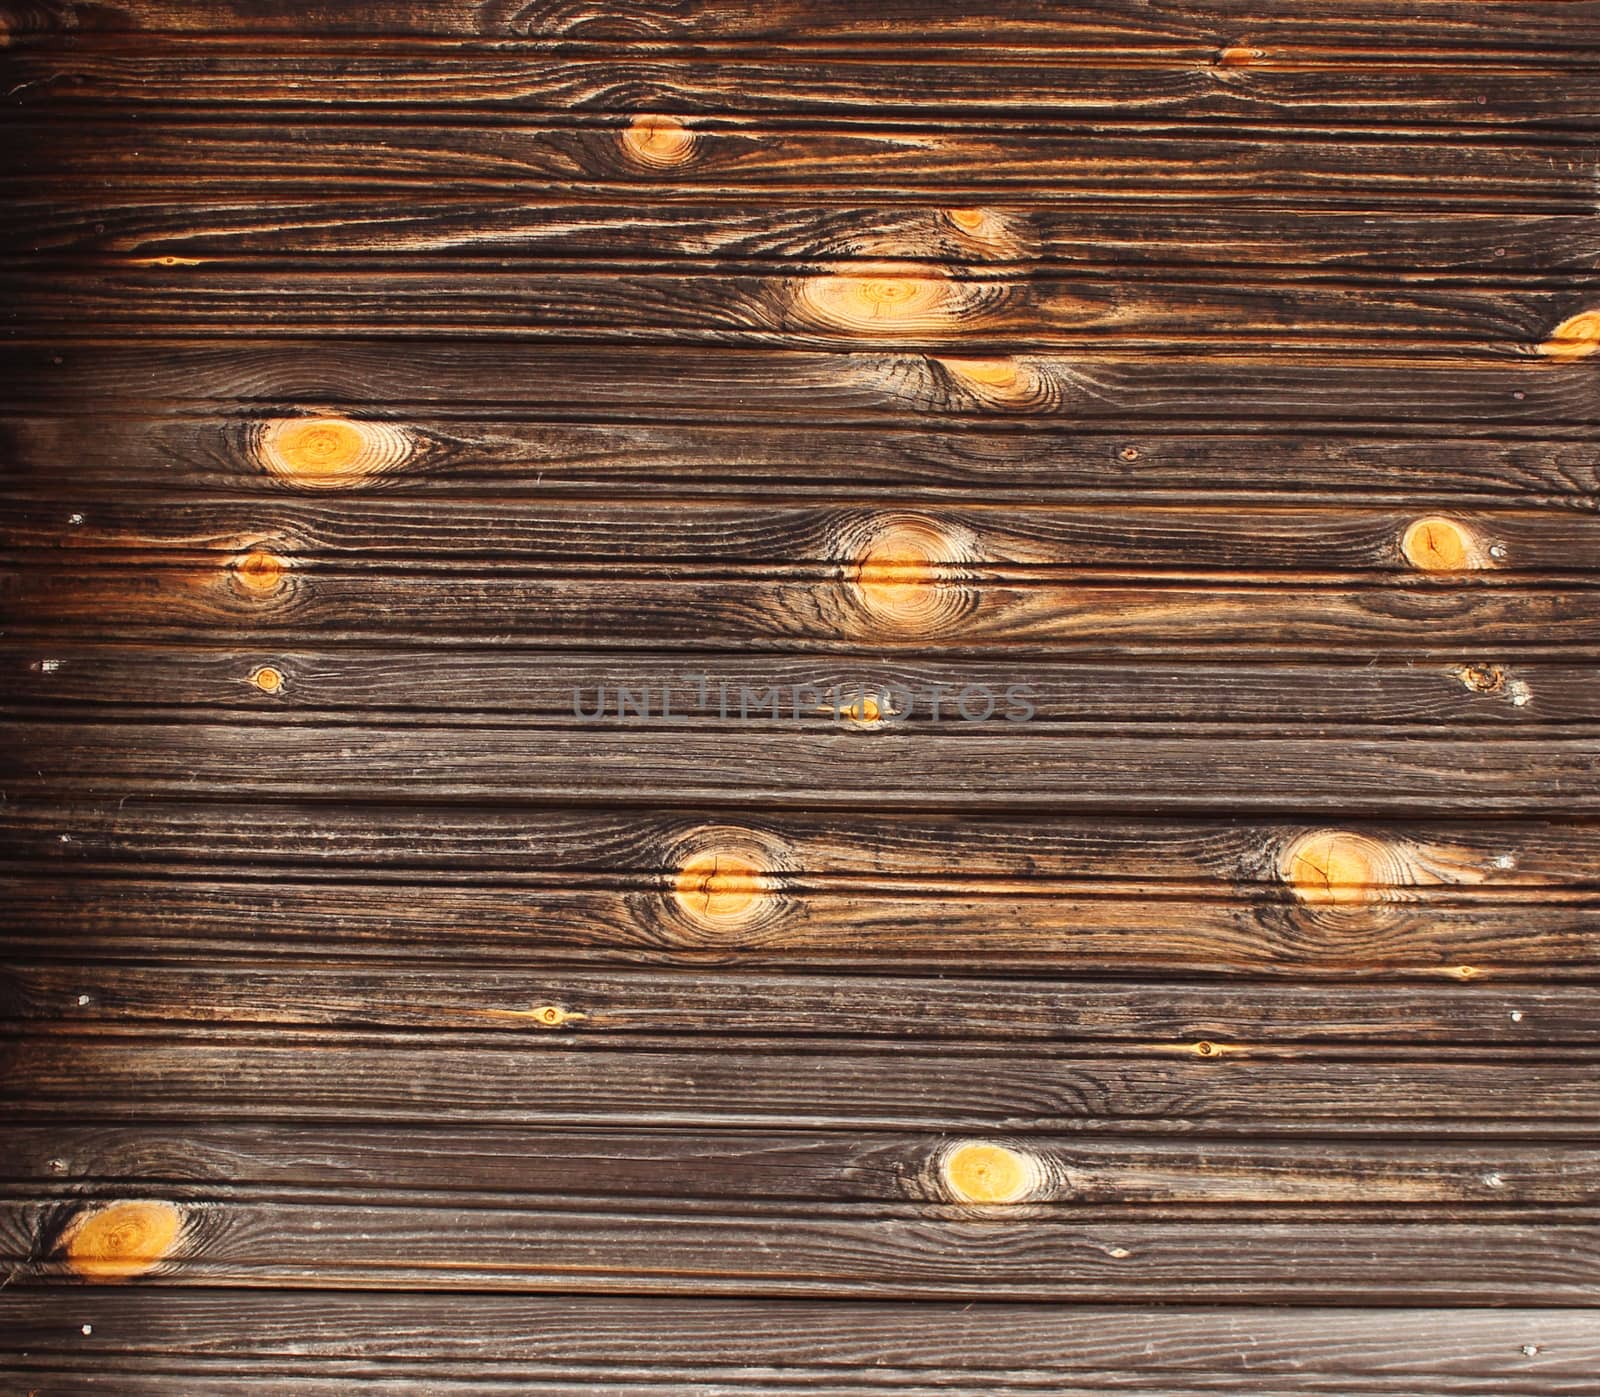 The texture of pure wood on the wall of an ordinary old wooden house, village Nizovskaya, Leningrad region, Russia.